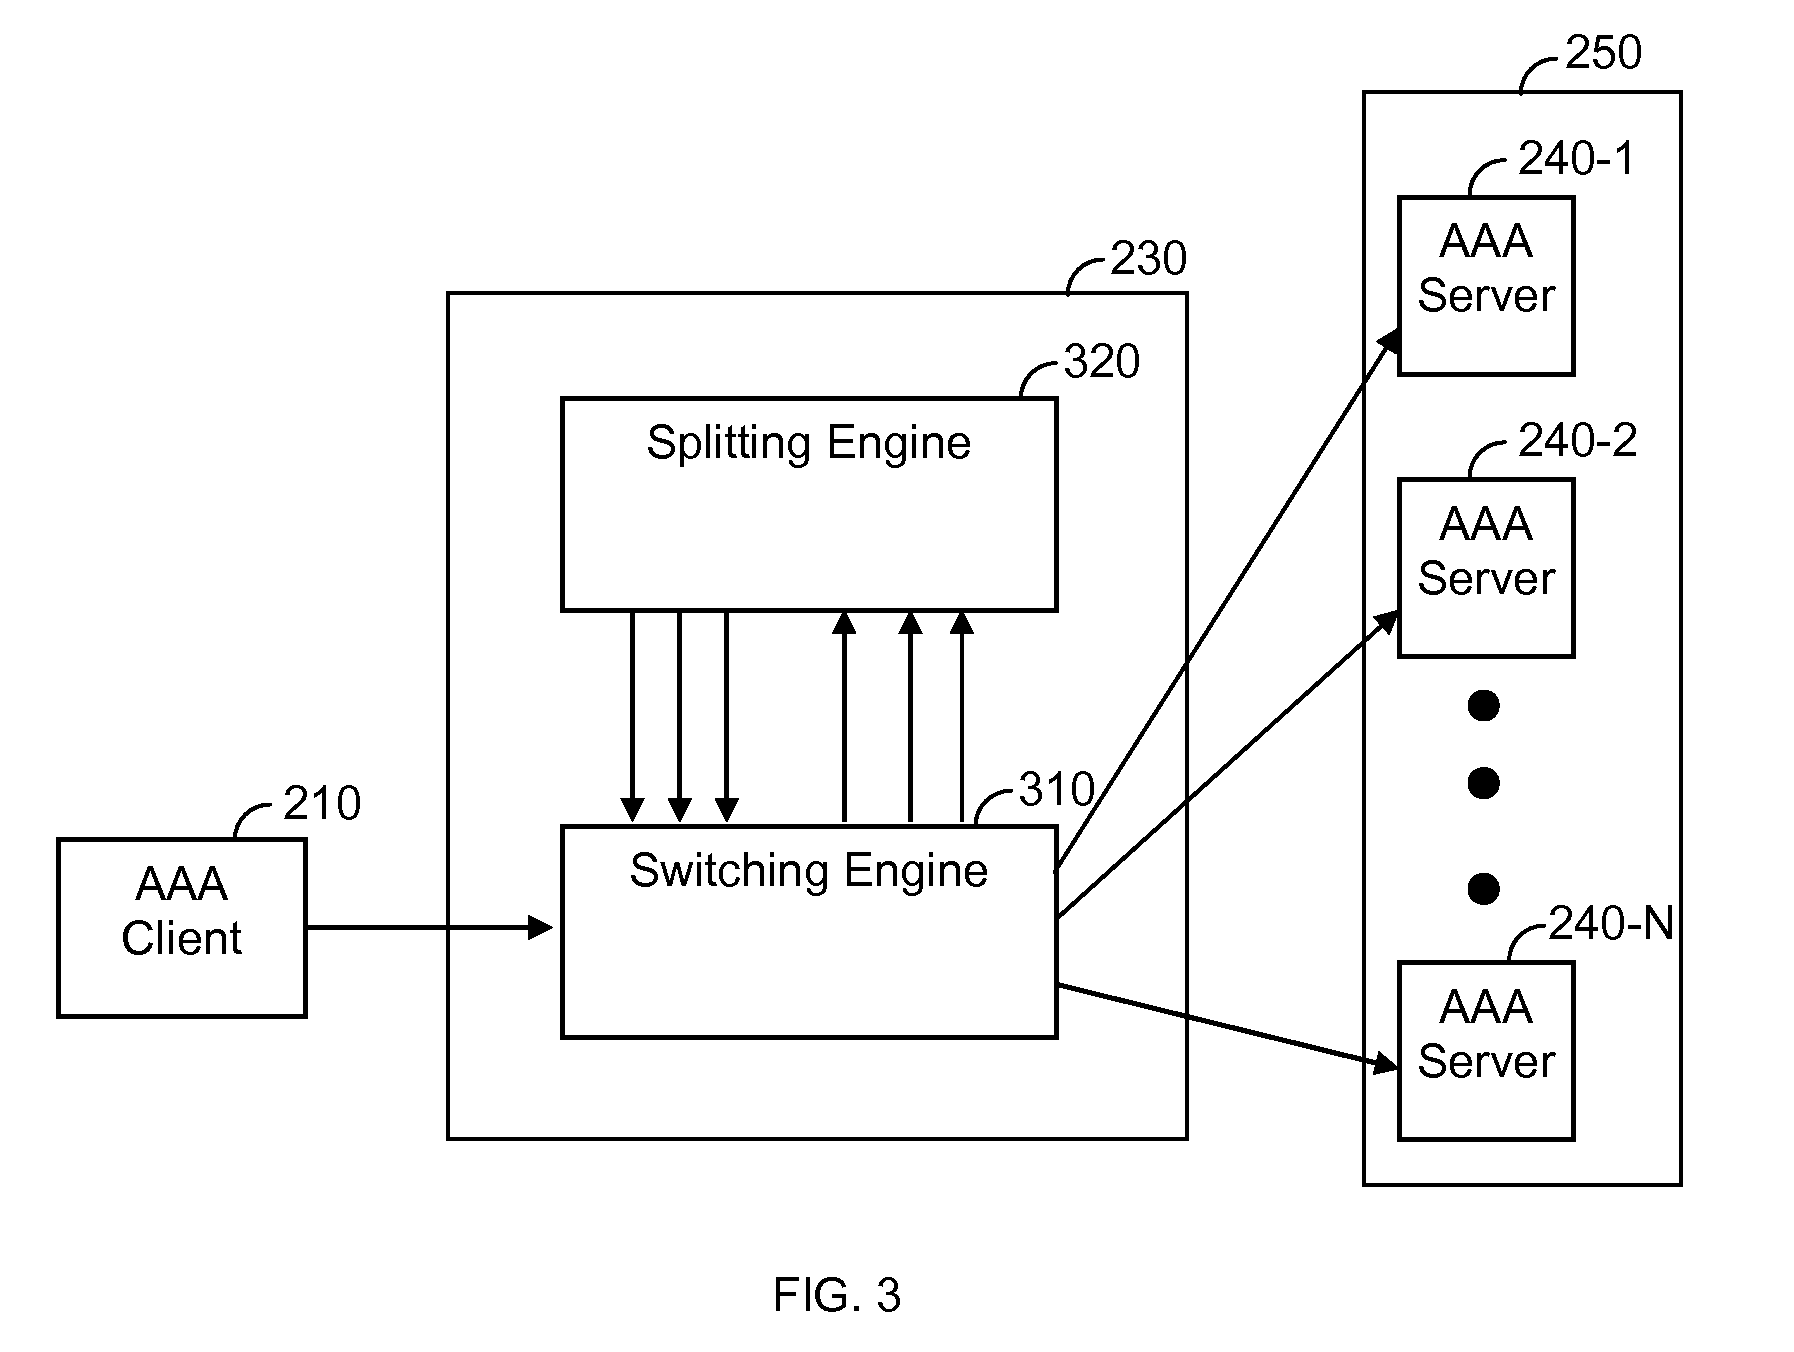 Method and System for Load Balancing over a Cluster of Authentication, Authorization and Accounting (AAA) Servers